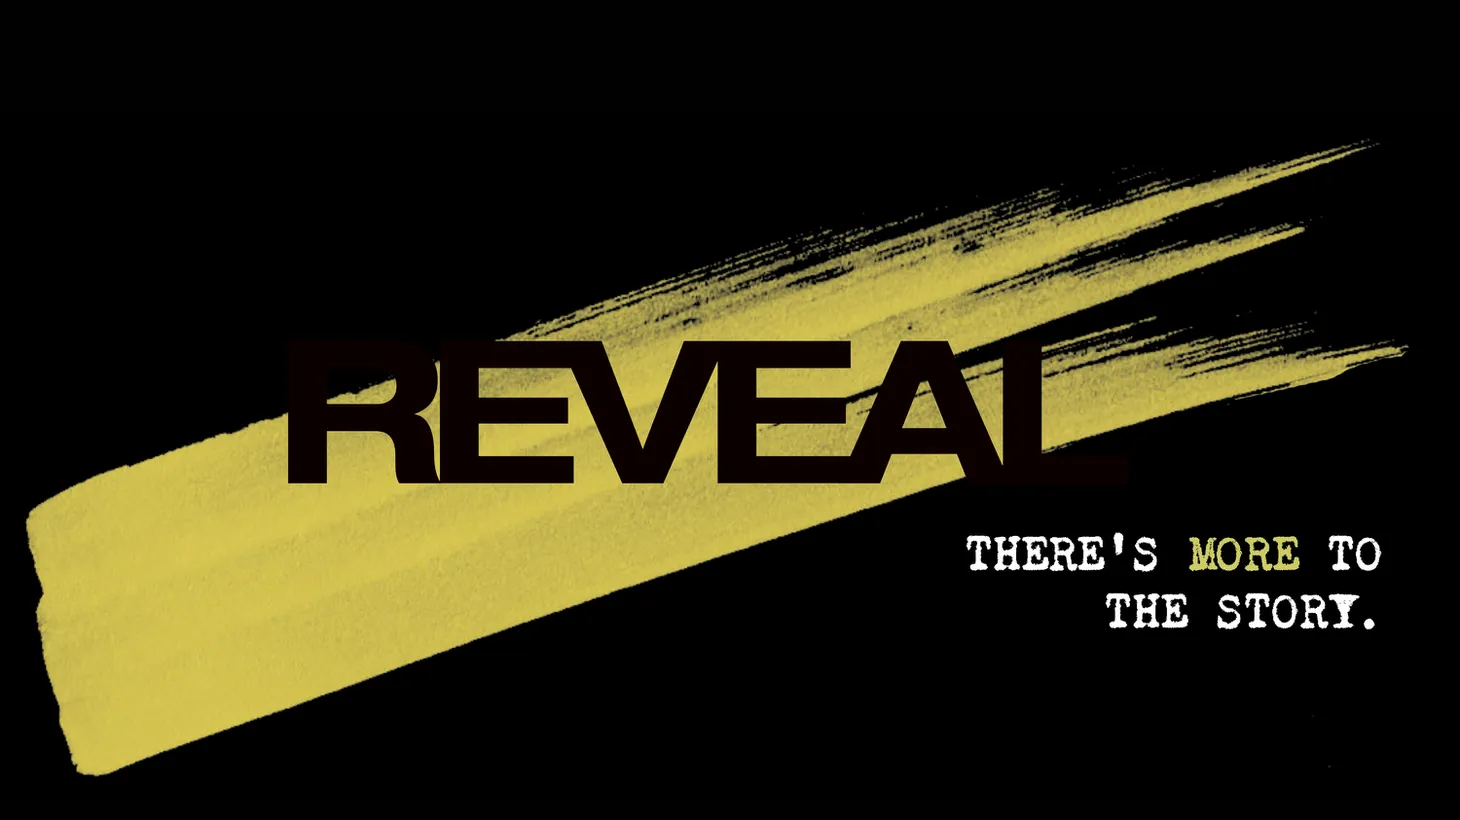 On this episode of Reveal, we look at #Pizzagate, the fake news story that inspired an act of domestic terrorism. This story takes us into the world of right-wing Twitter trolls, pro-Trump political operatives and fake-news profiteers from St. Louis to Macedonia.